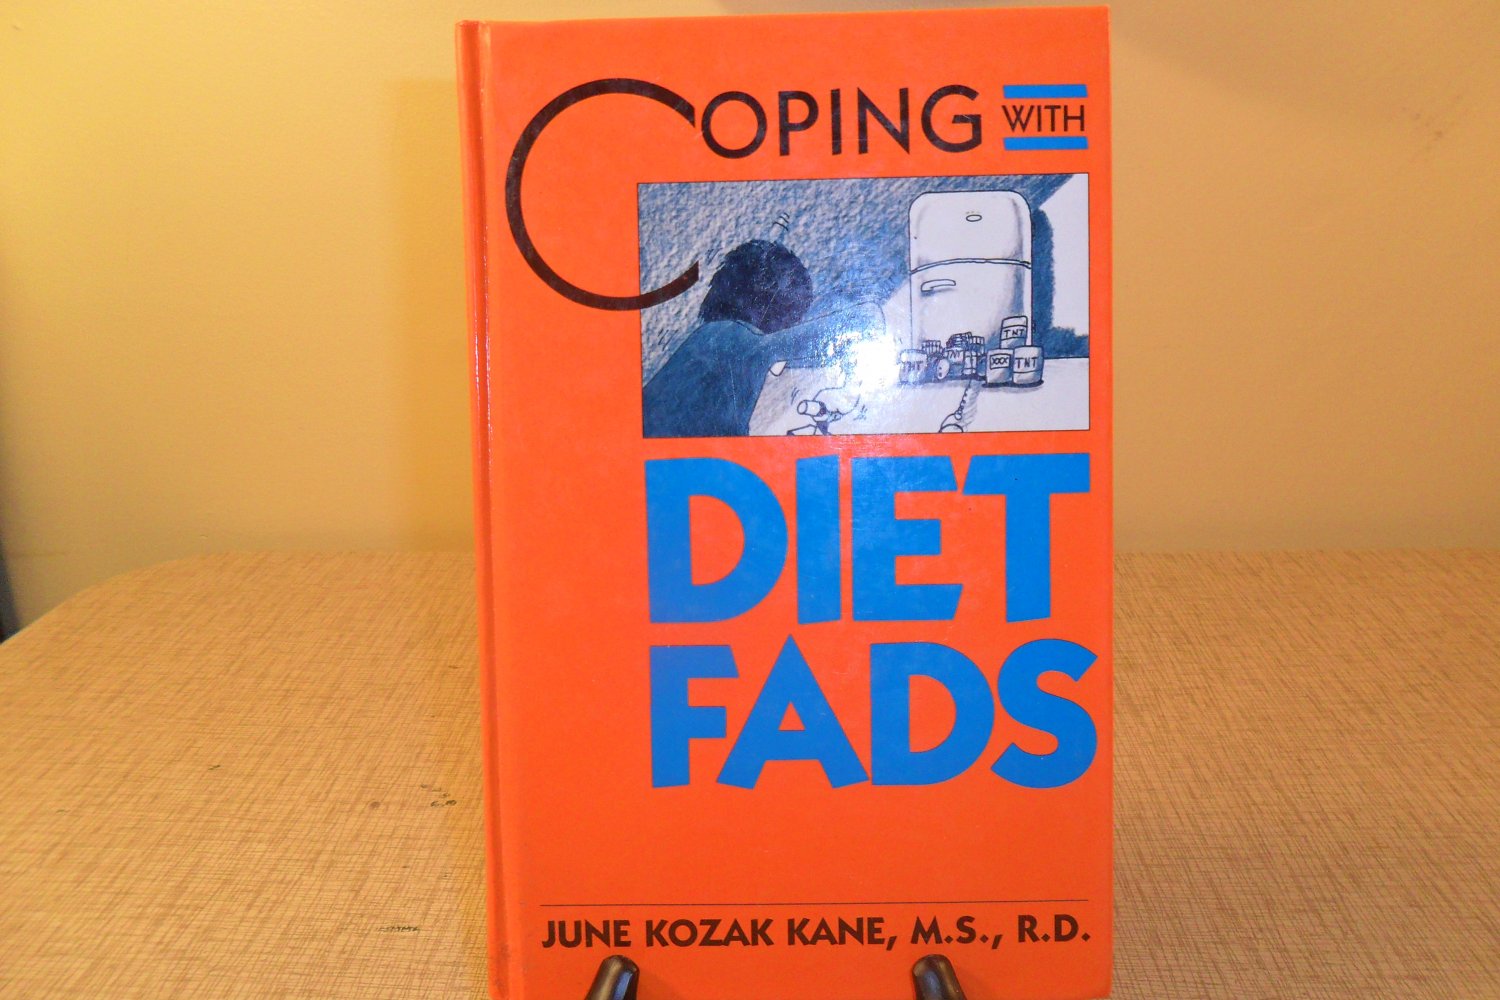 1990 COPING WITH DIET FADS HARDCOVER BOOK BY JUNE KOZAK KANE